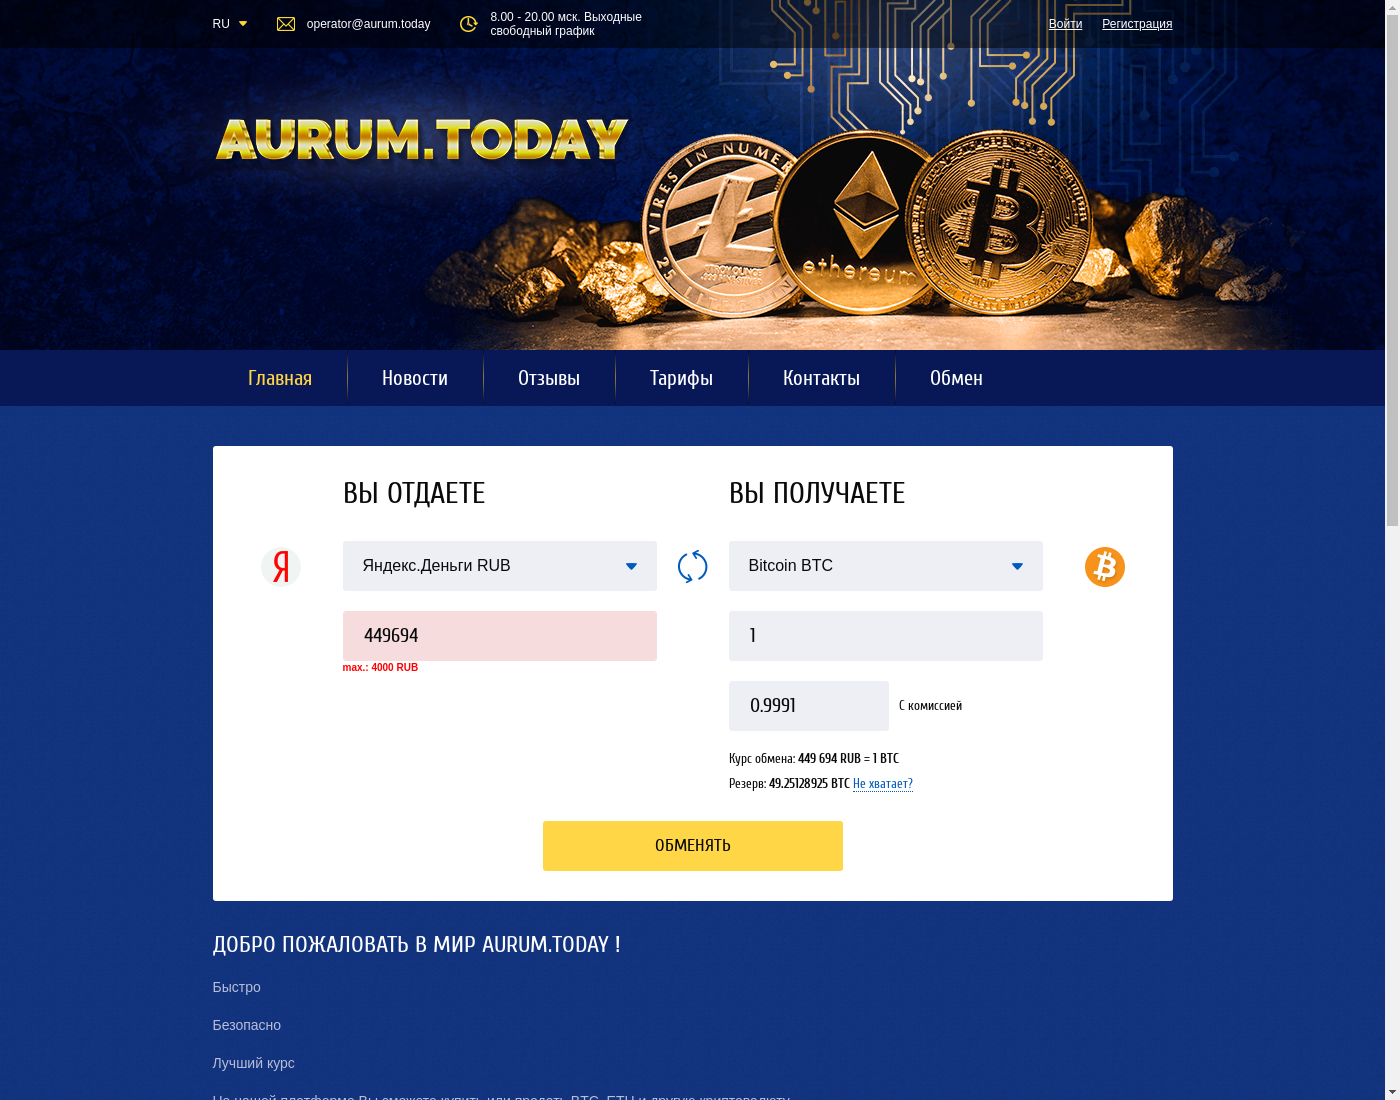 Aurum user interface: the home page in English